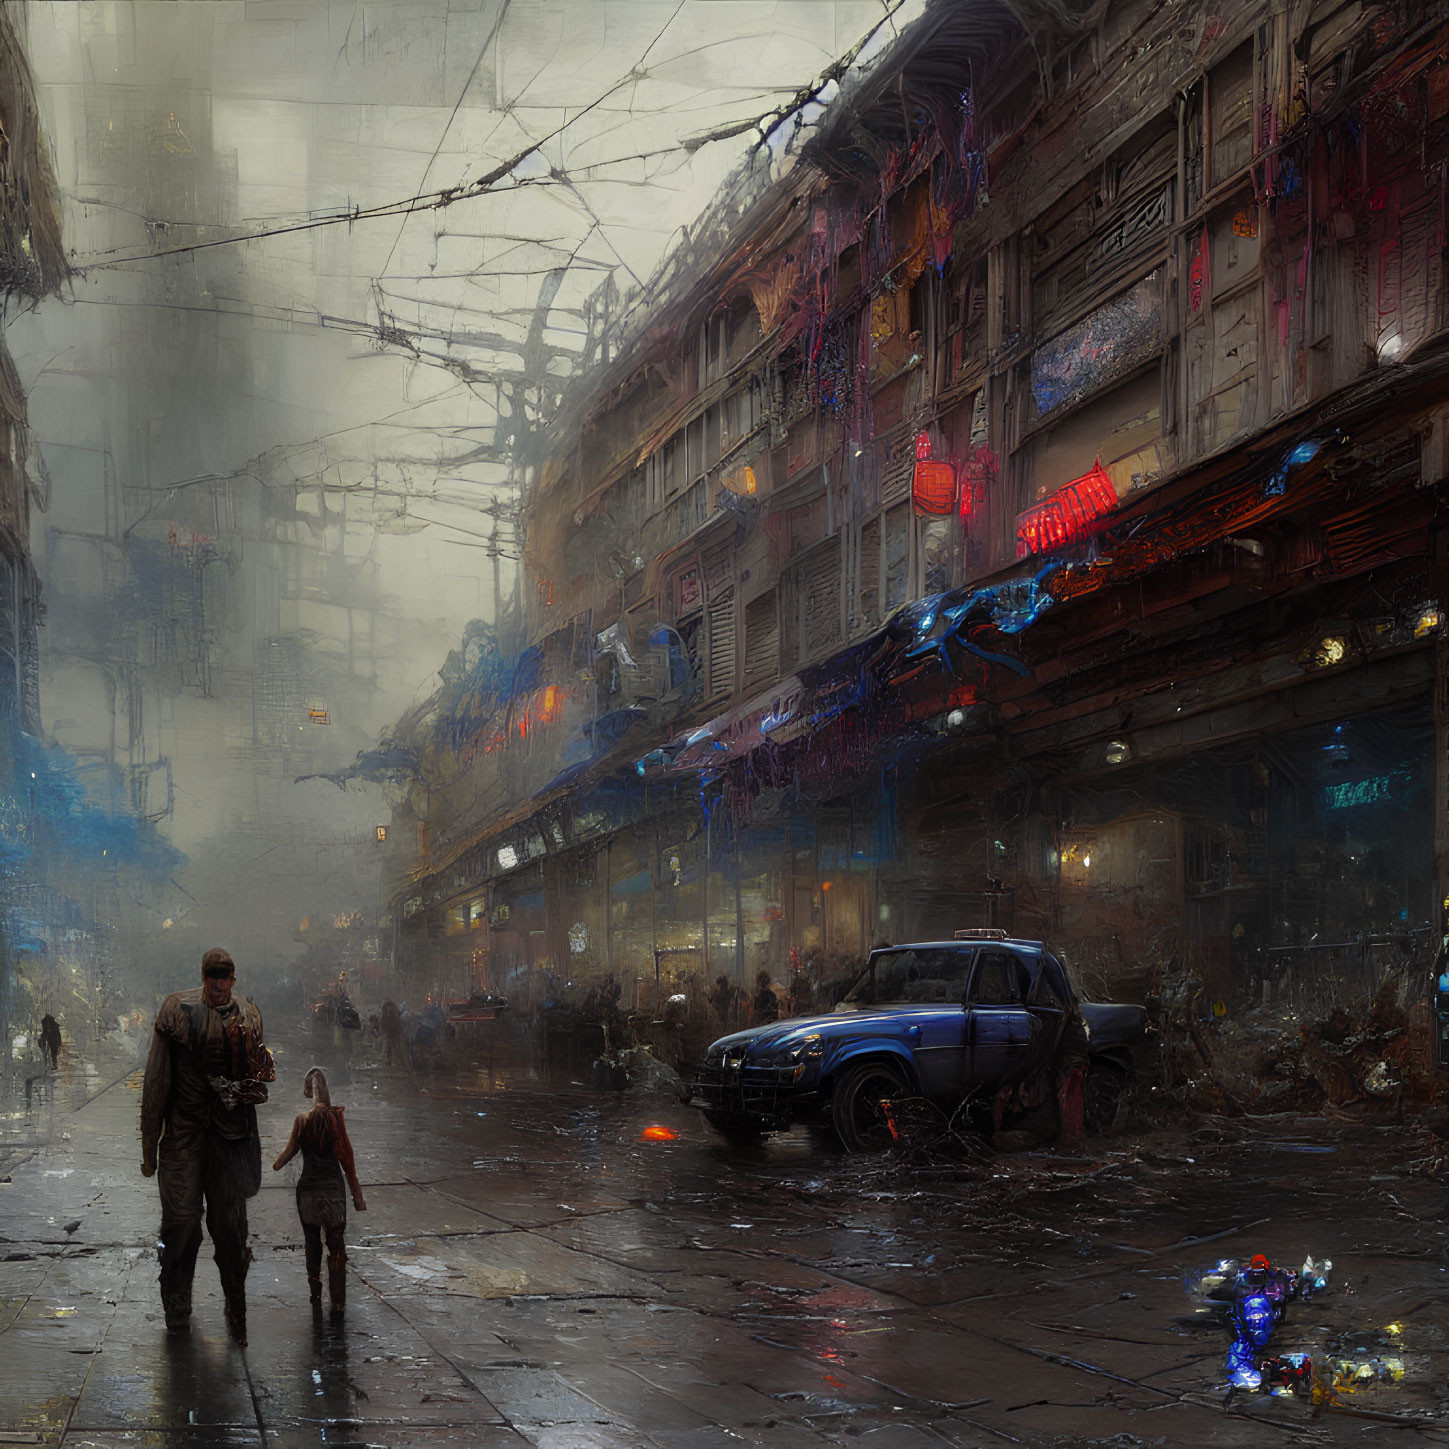 Man and child navigating dystopian cityscape with dilapidated buildings and neon signs.